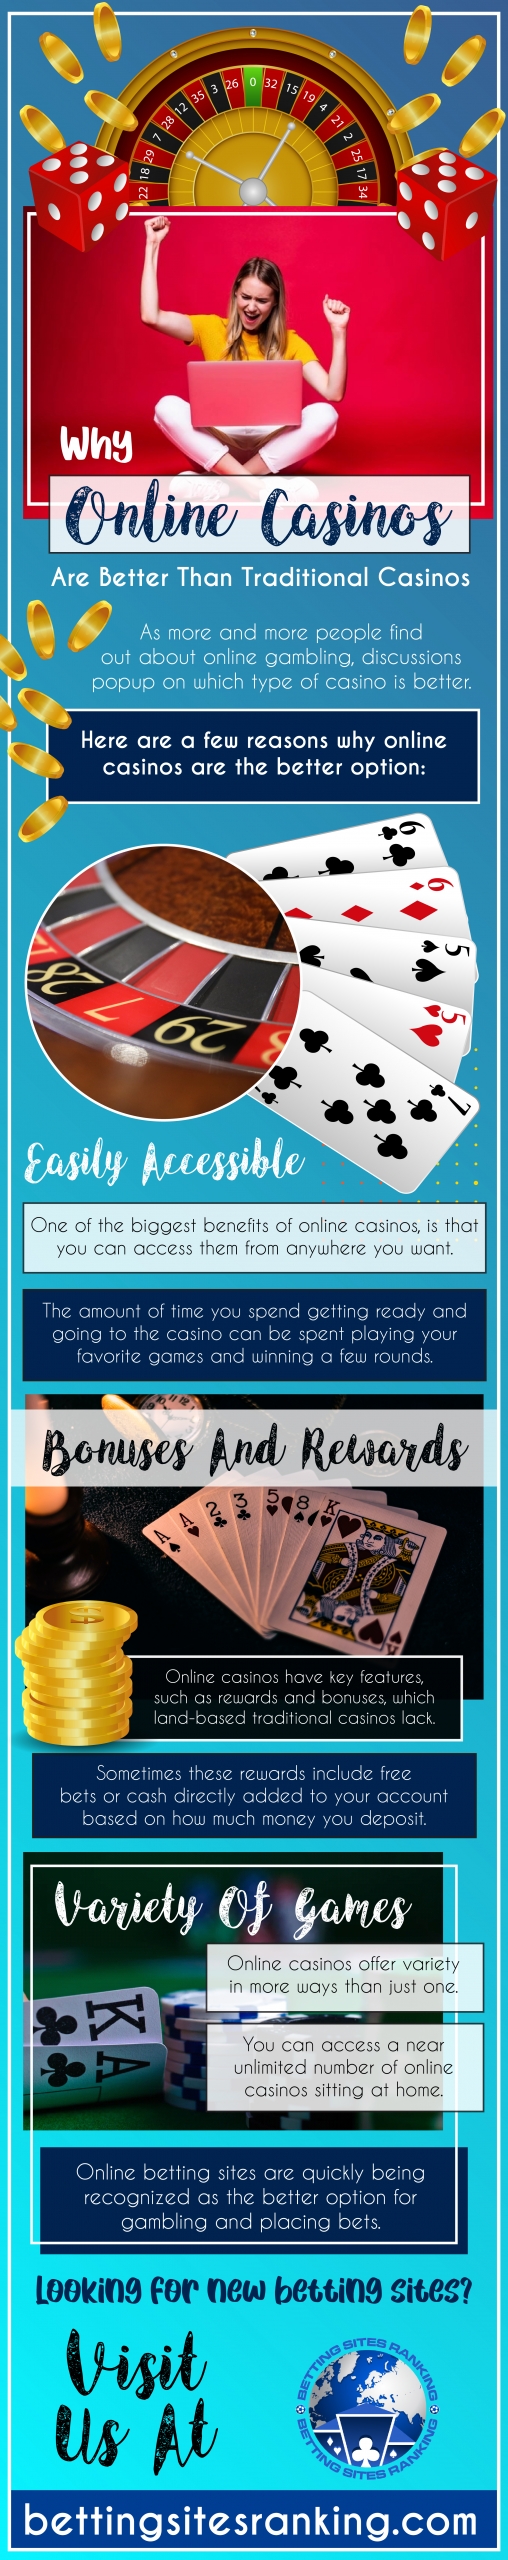 Why-Online-Casinos-Are-Better-Than-Traditional-Casinos